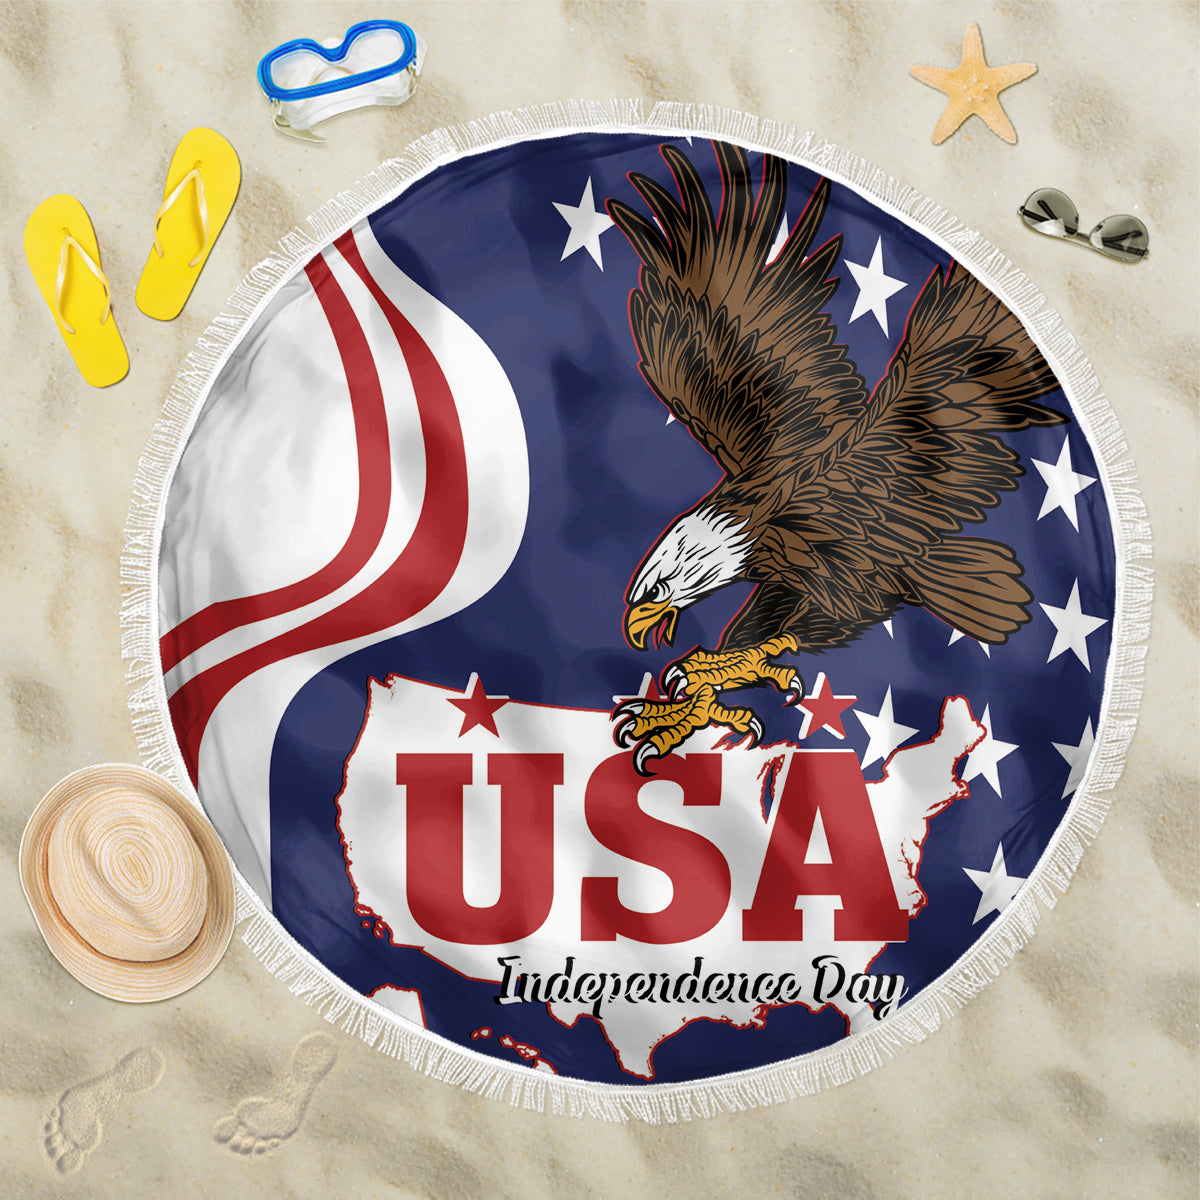 United States Independence Day Beach Blanket USA Bald Eagle Happy 4th Of July